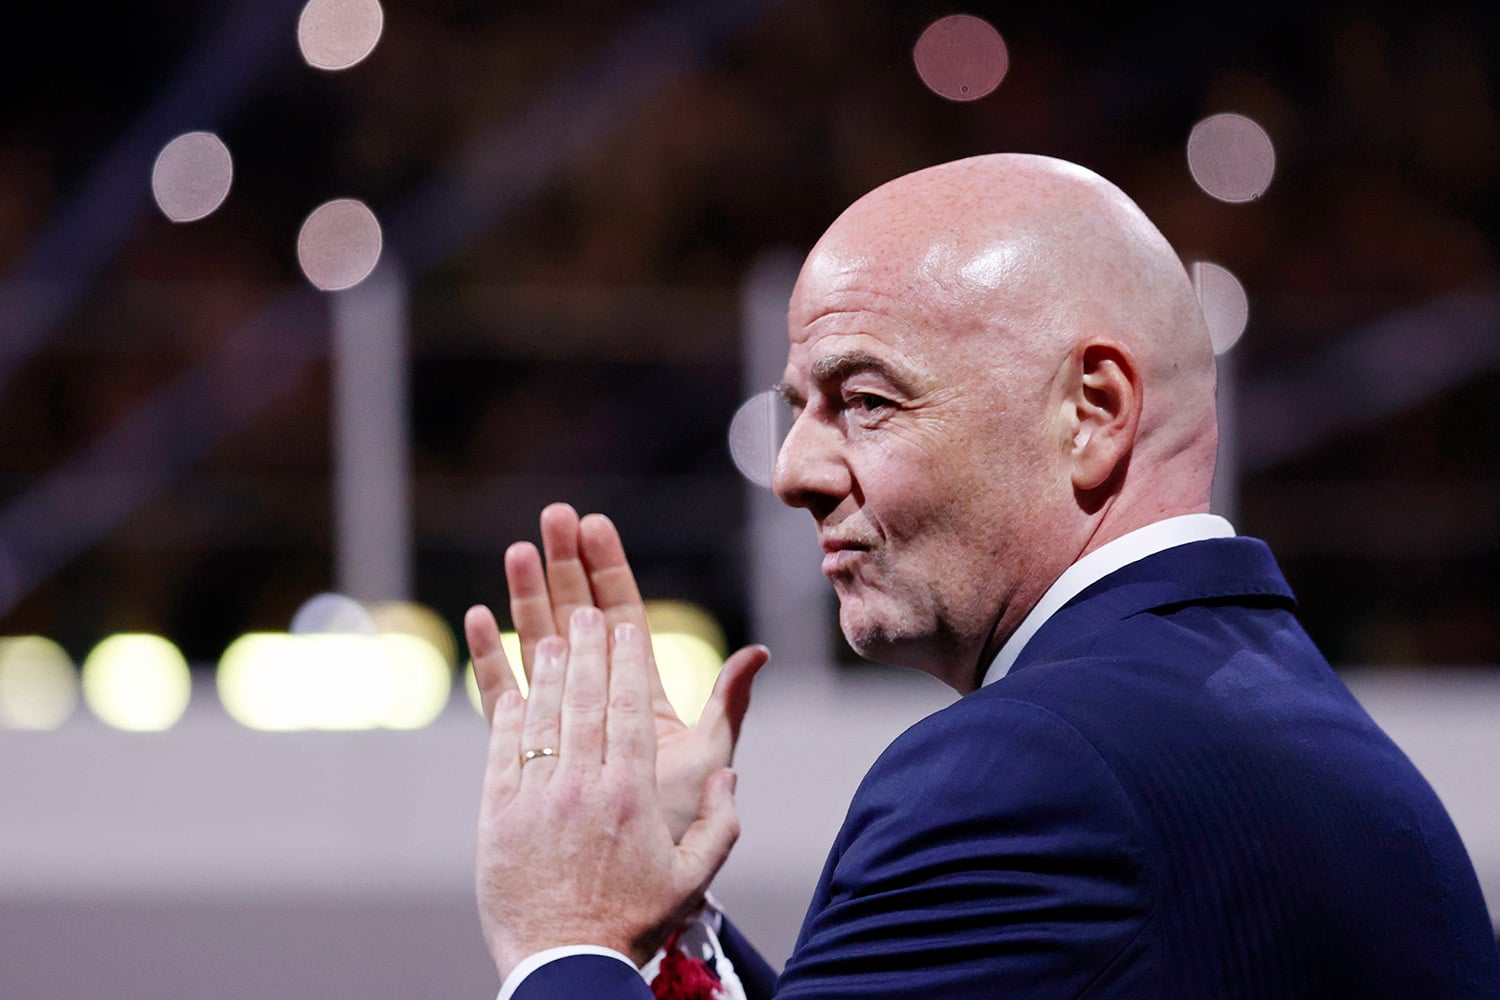 Fifa president Gianni Infantino clapping hands